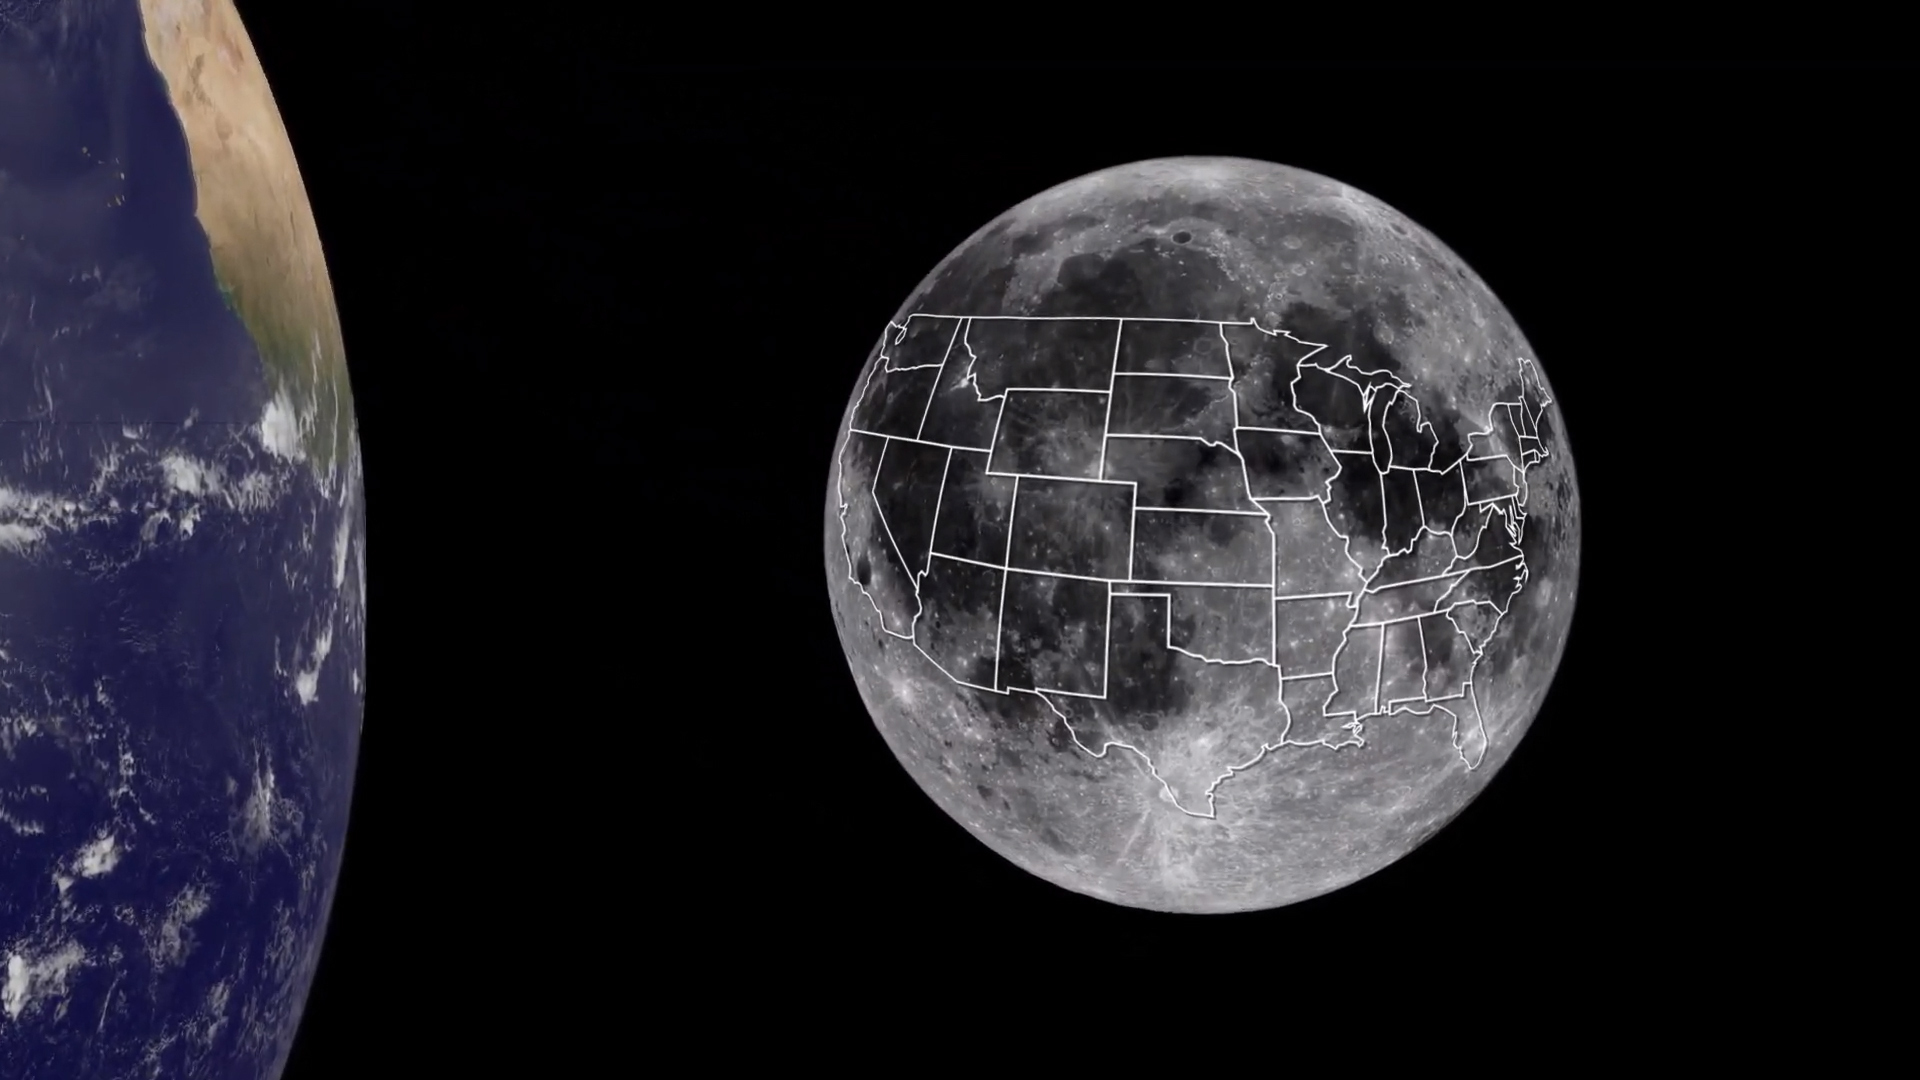 Illustration showing a map of the United States covering most of the Moon's near side.